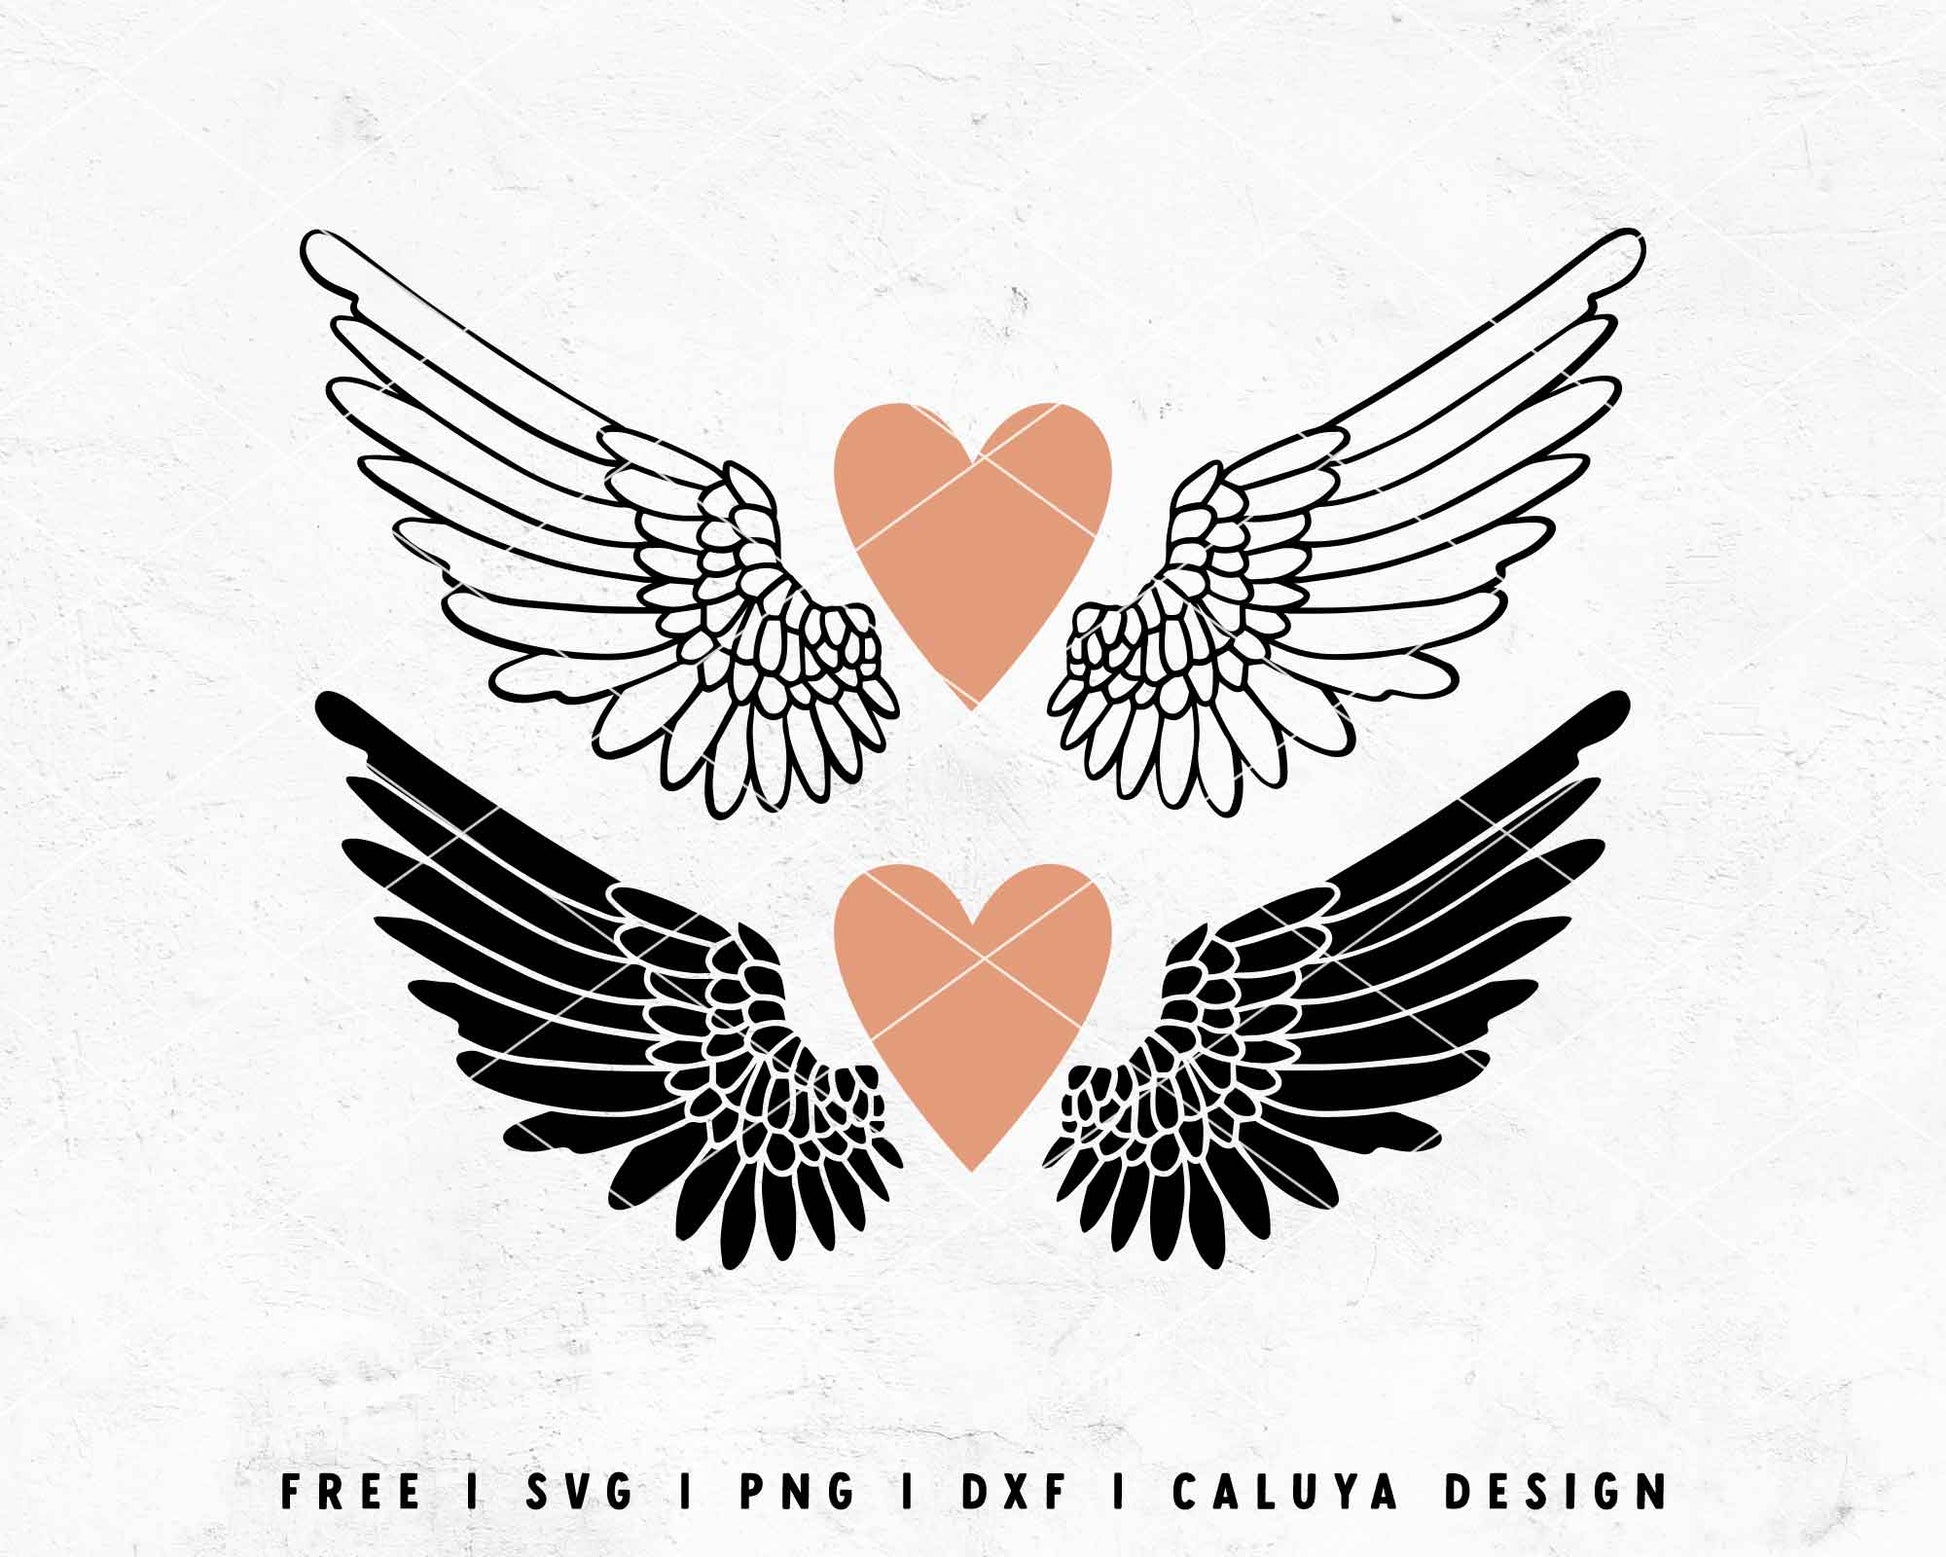 FREE Heart With Wings SVG, Grief SVG